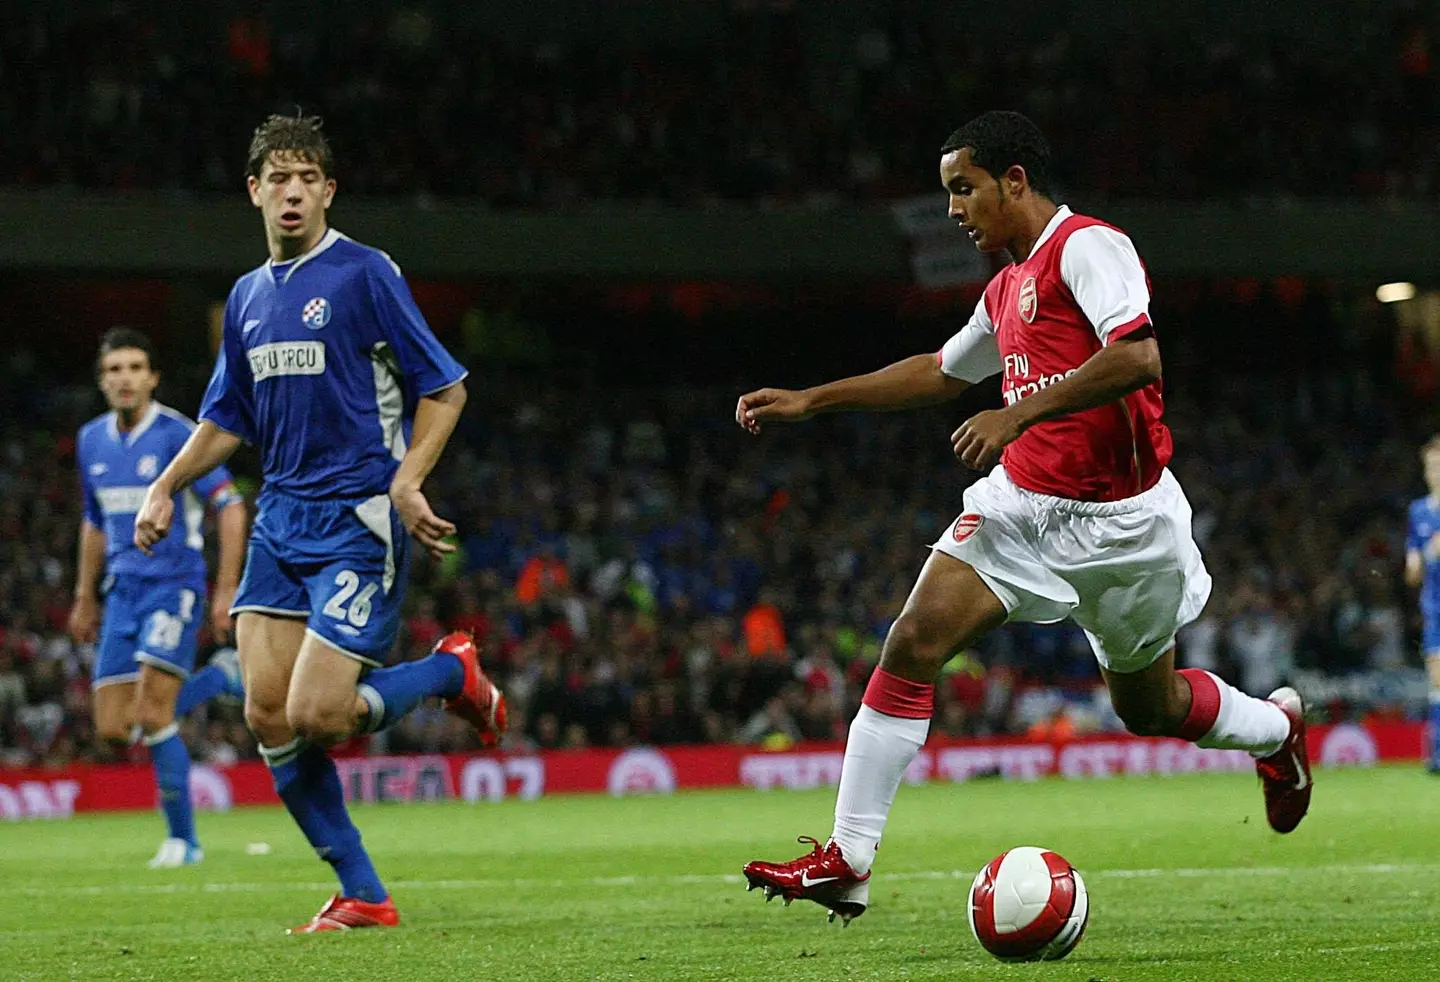 Drpic in action against Arsenal. (Image